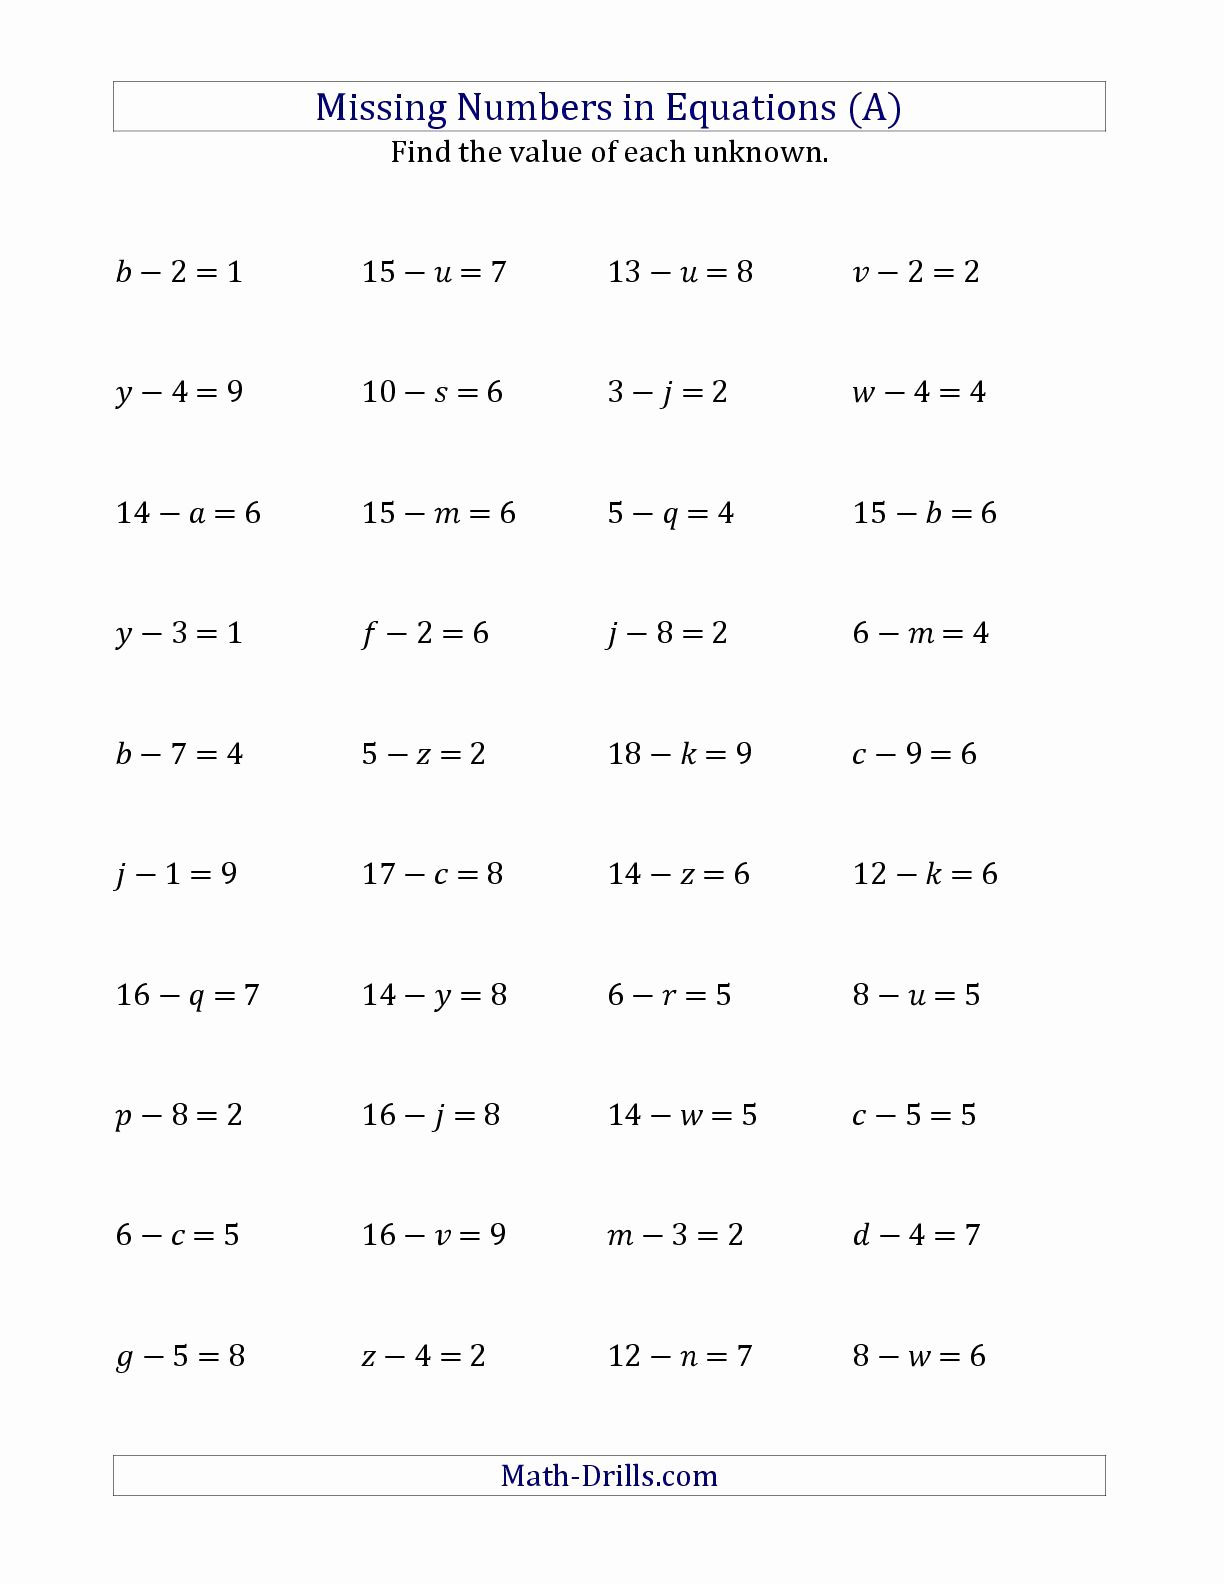 Solving Equations Multiplication And Division Worksheets